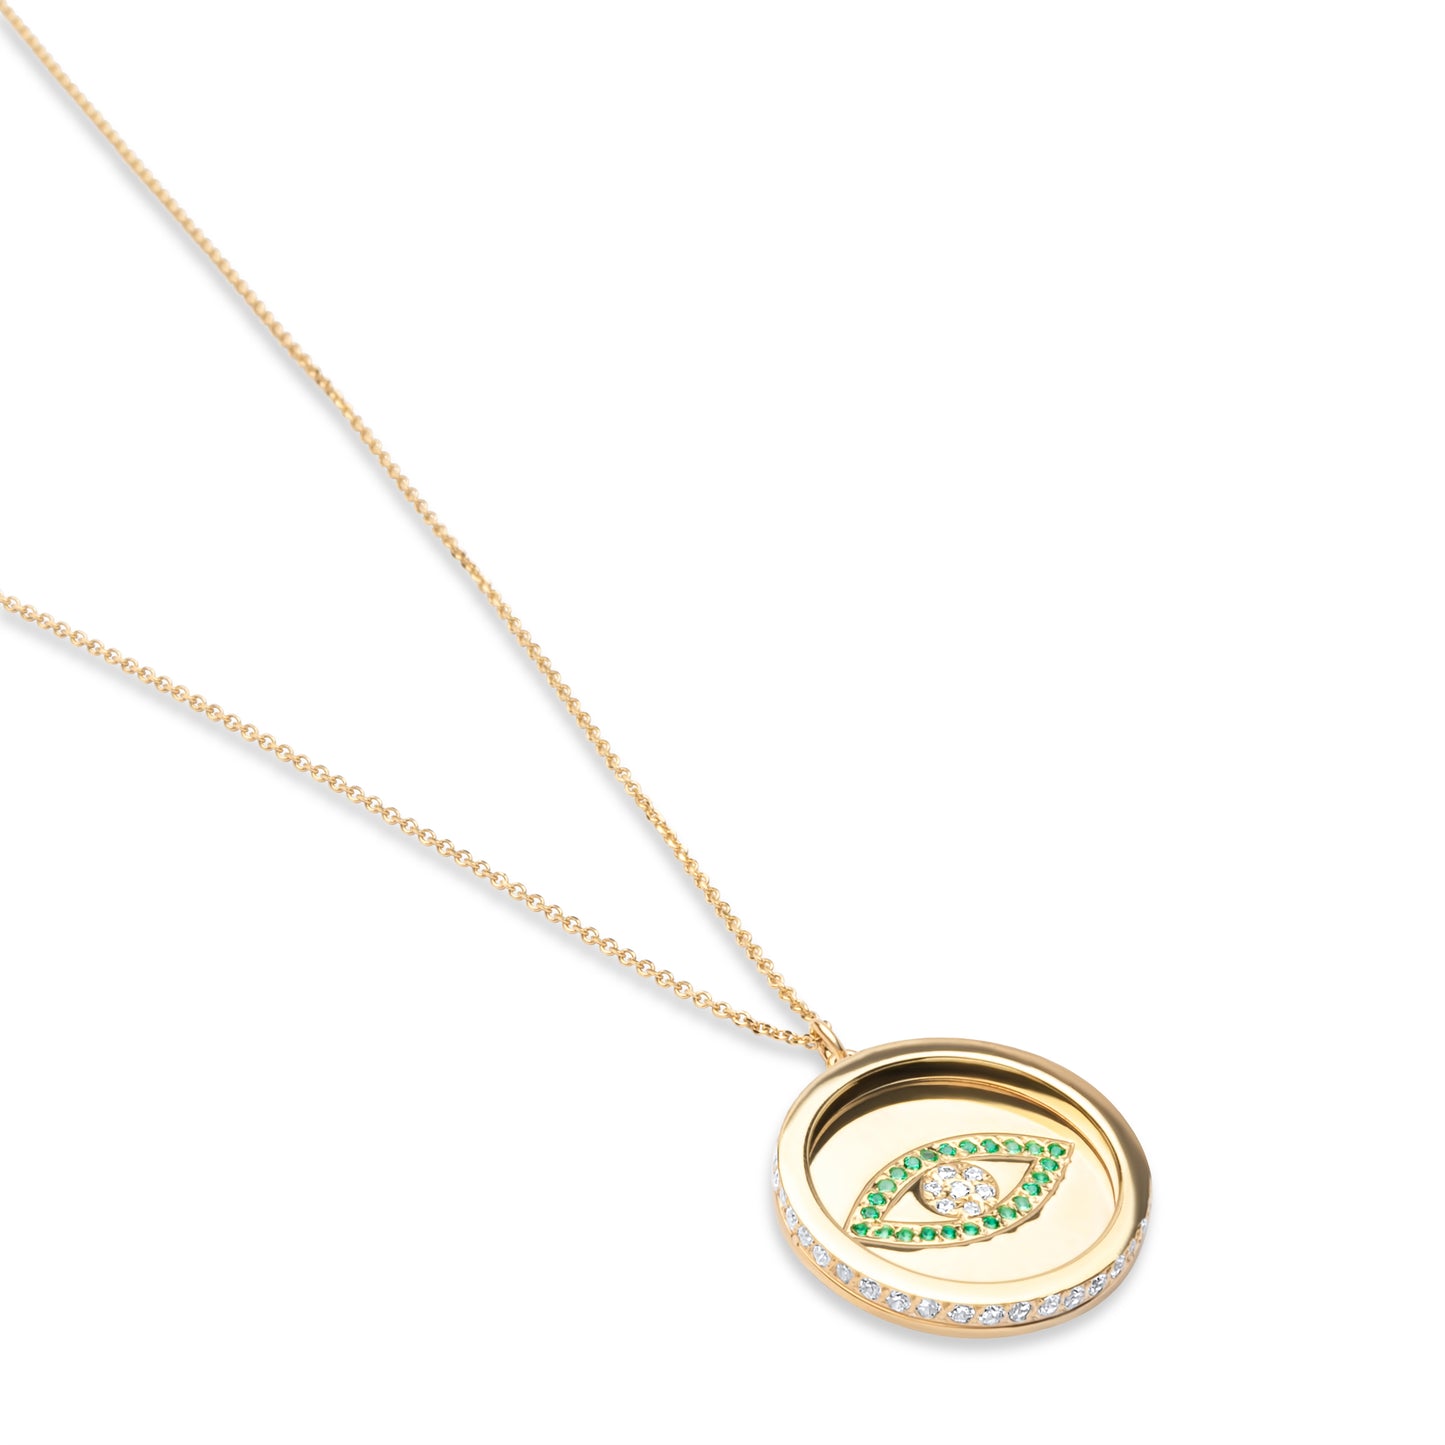 Emerald Eye Coin Necklace - Gold Plated